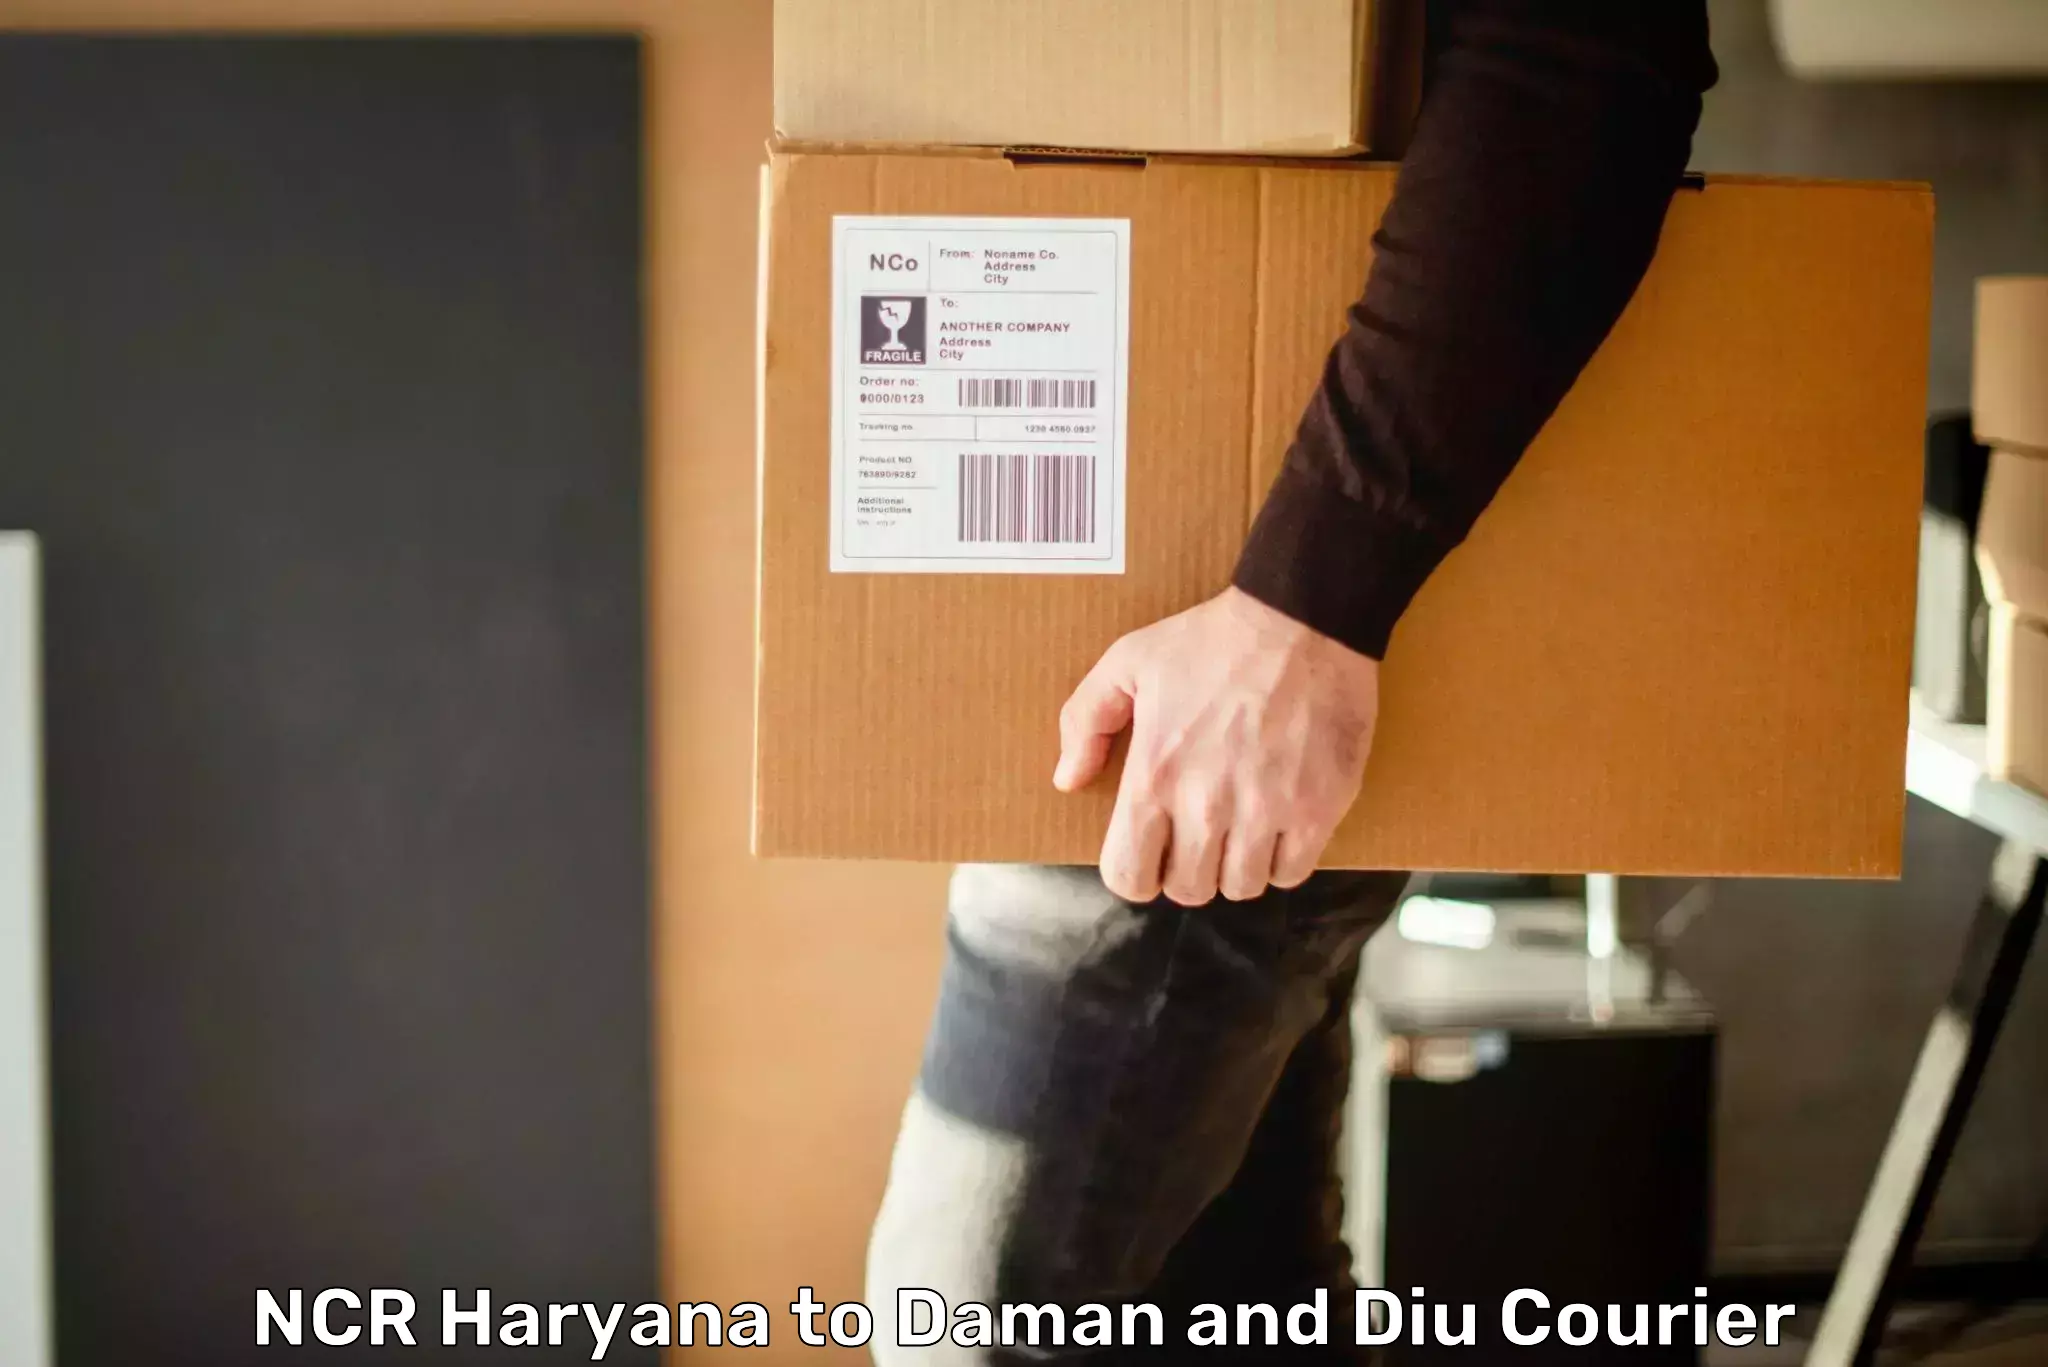 Courier service efficiency NCR Haryana to Daman